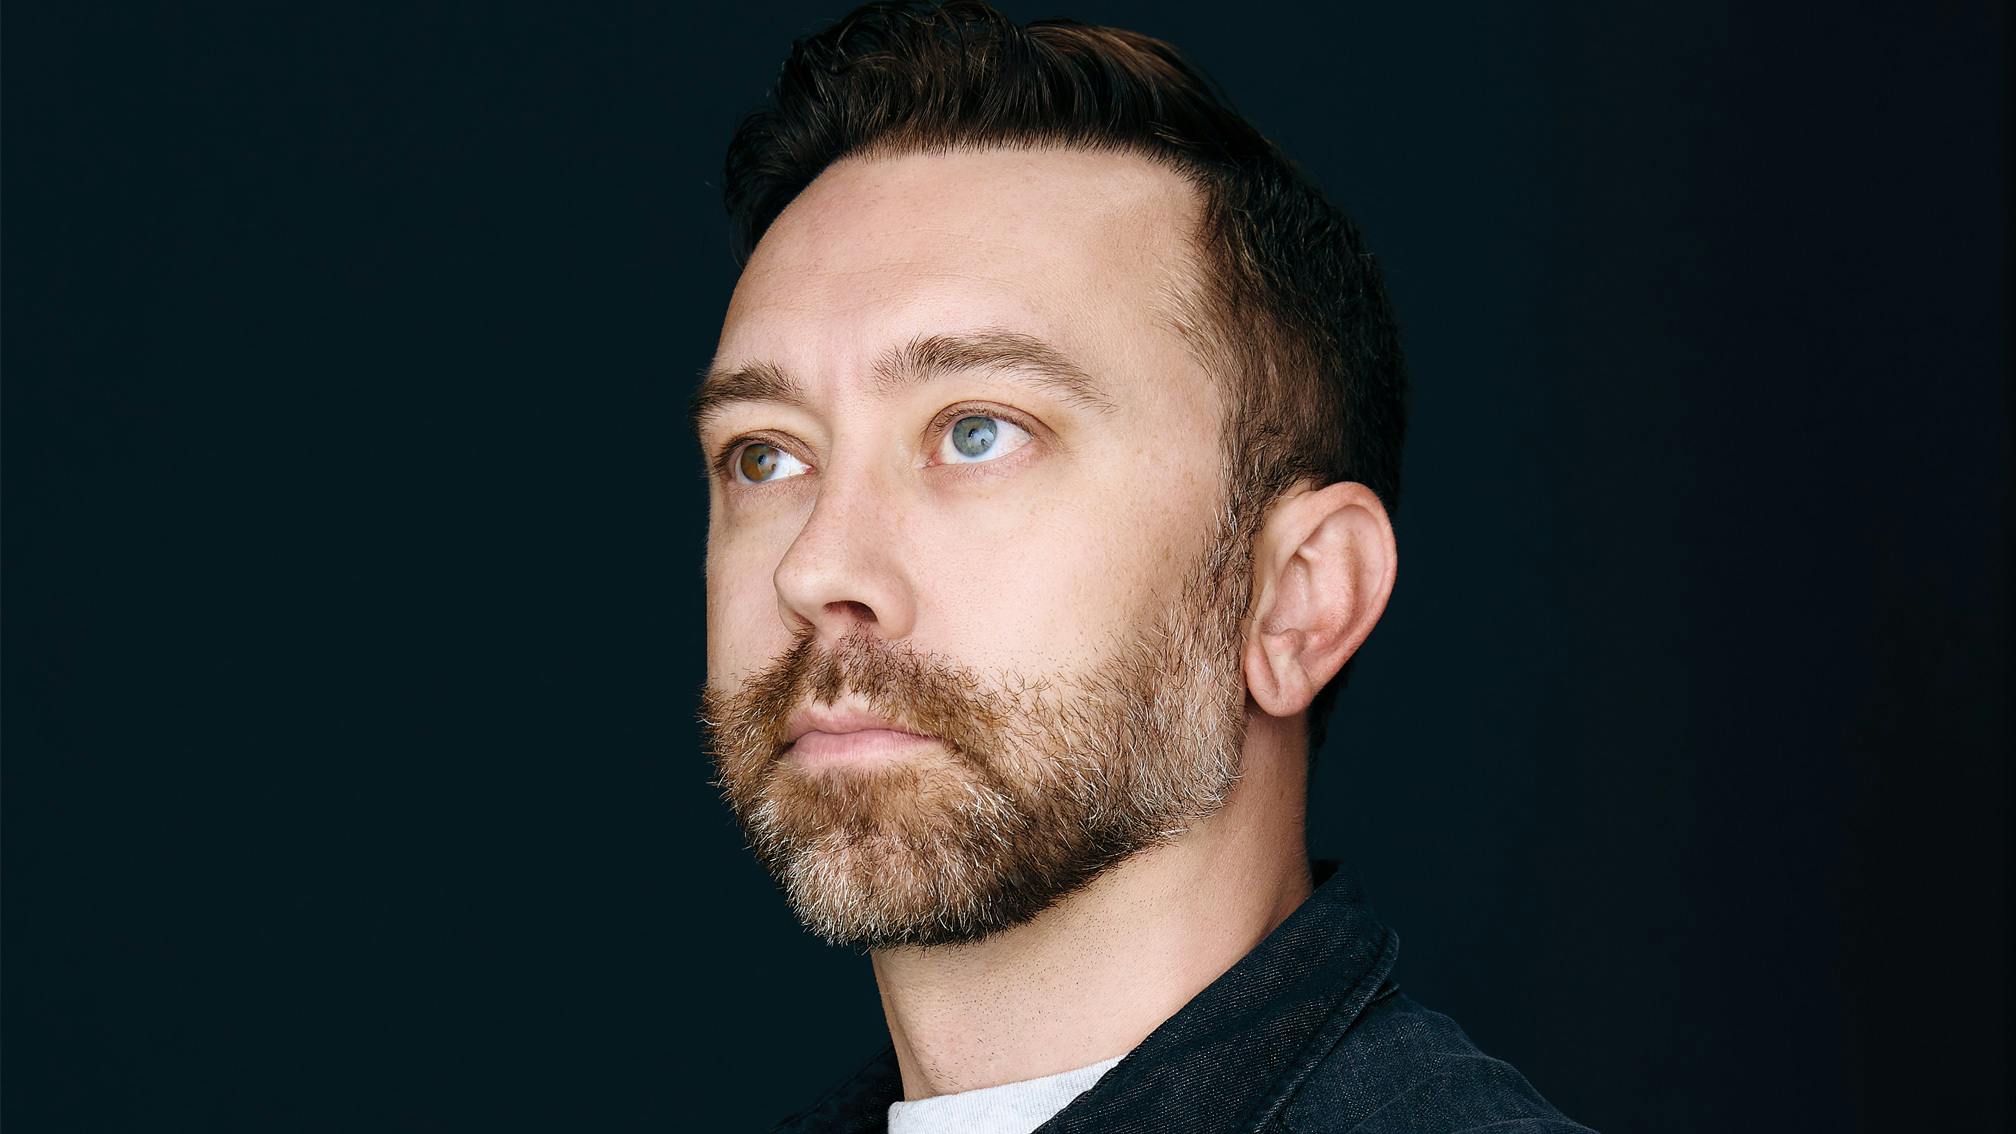 Rise Against’s Tim McIlrath: “If people had a ‘Tim for president’ bumper sticker, I’d say, ‘Slow down, I’m often full of as many questions as you are’”